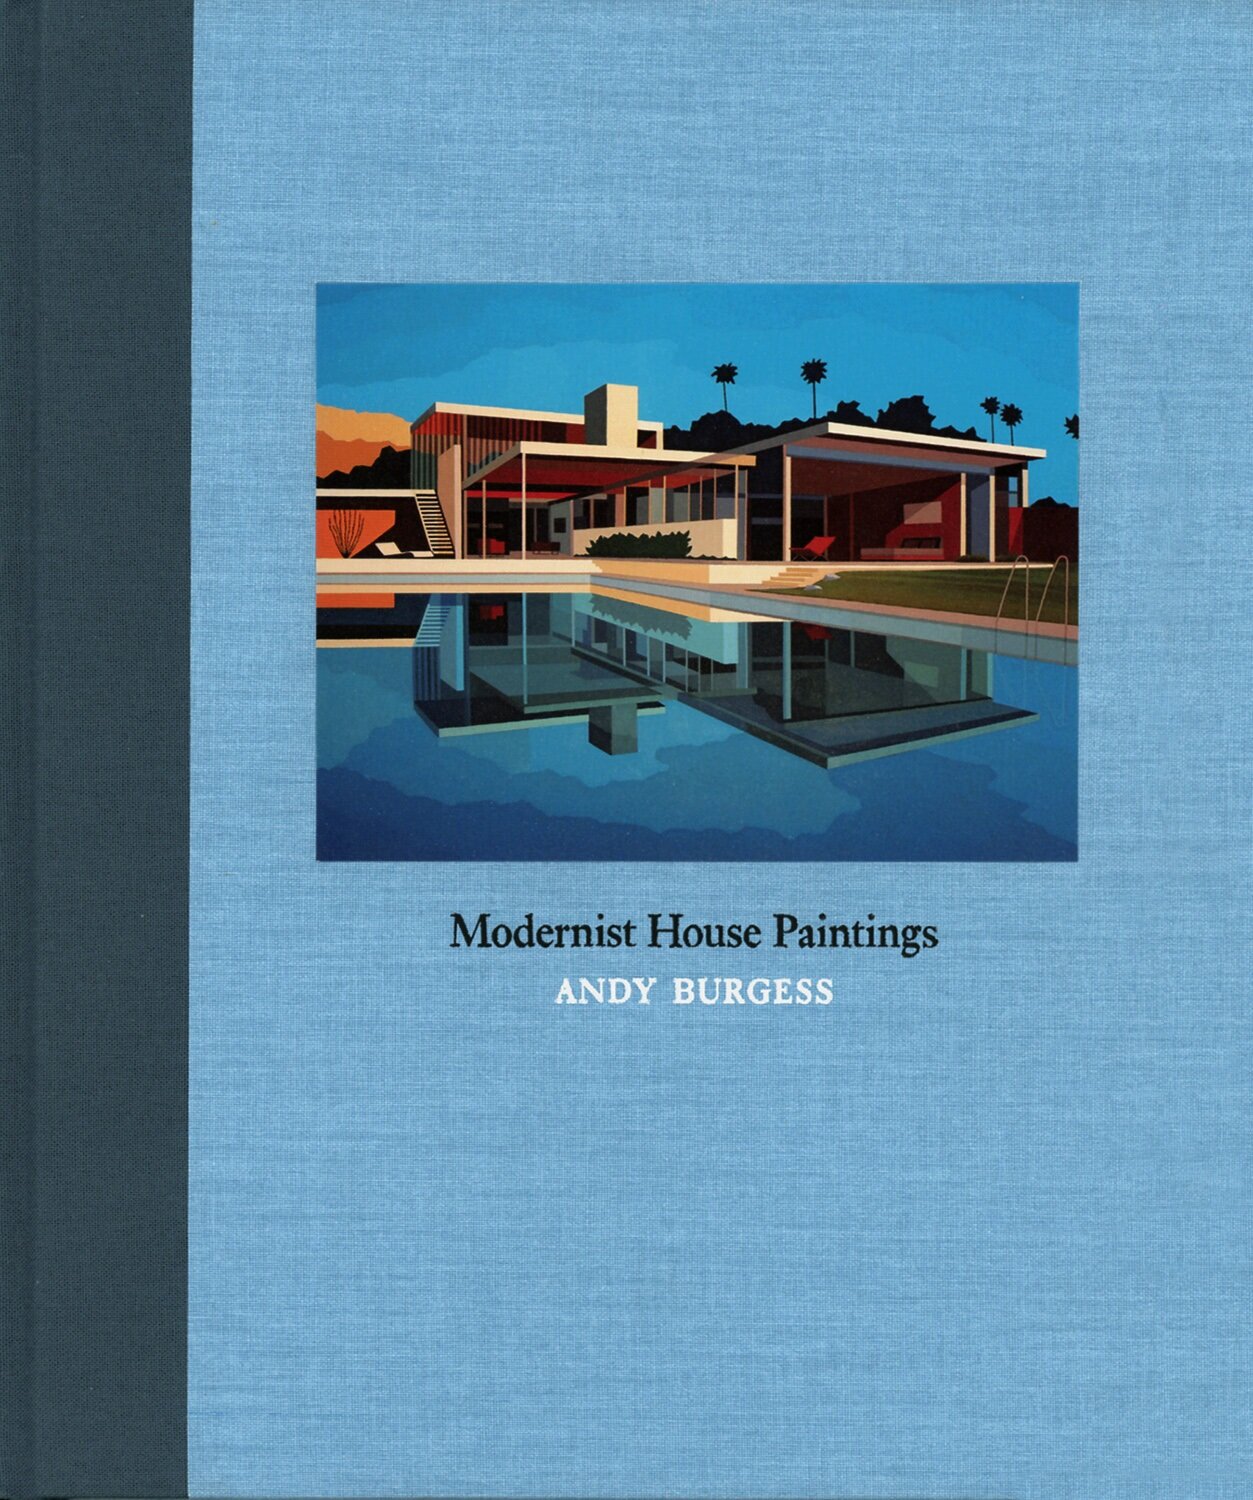 Modernist House Paintings: Andy Burgess